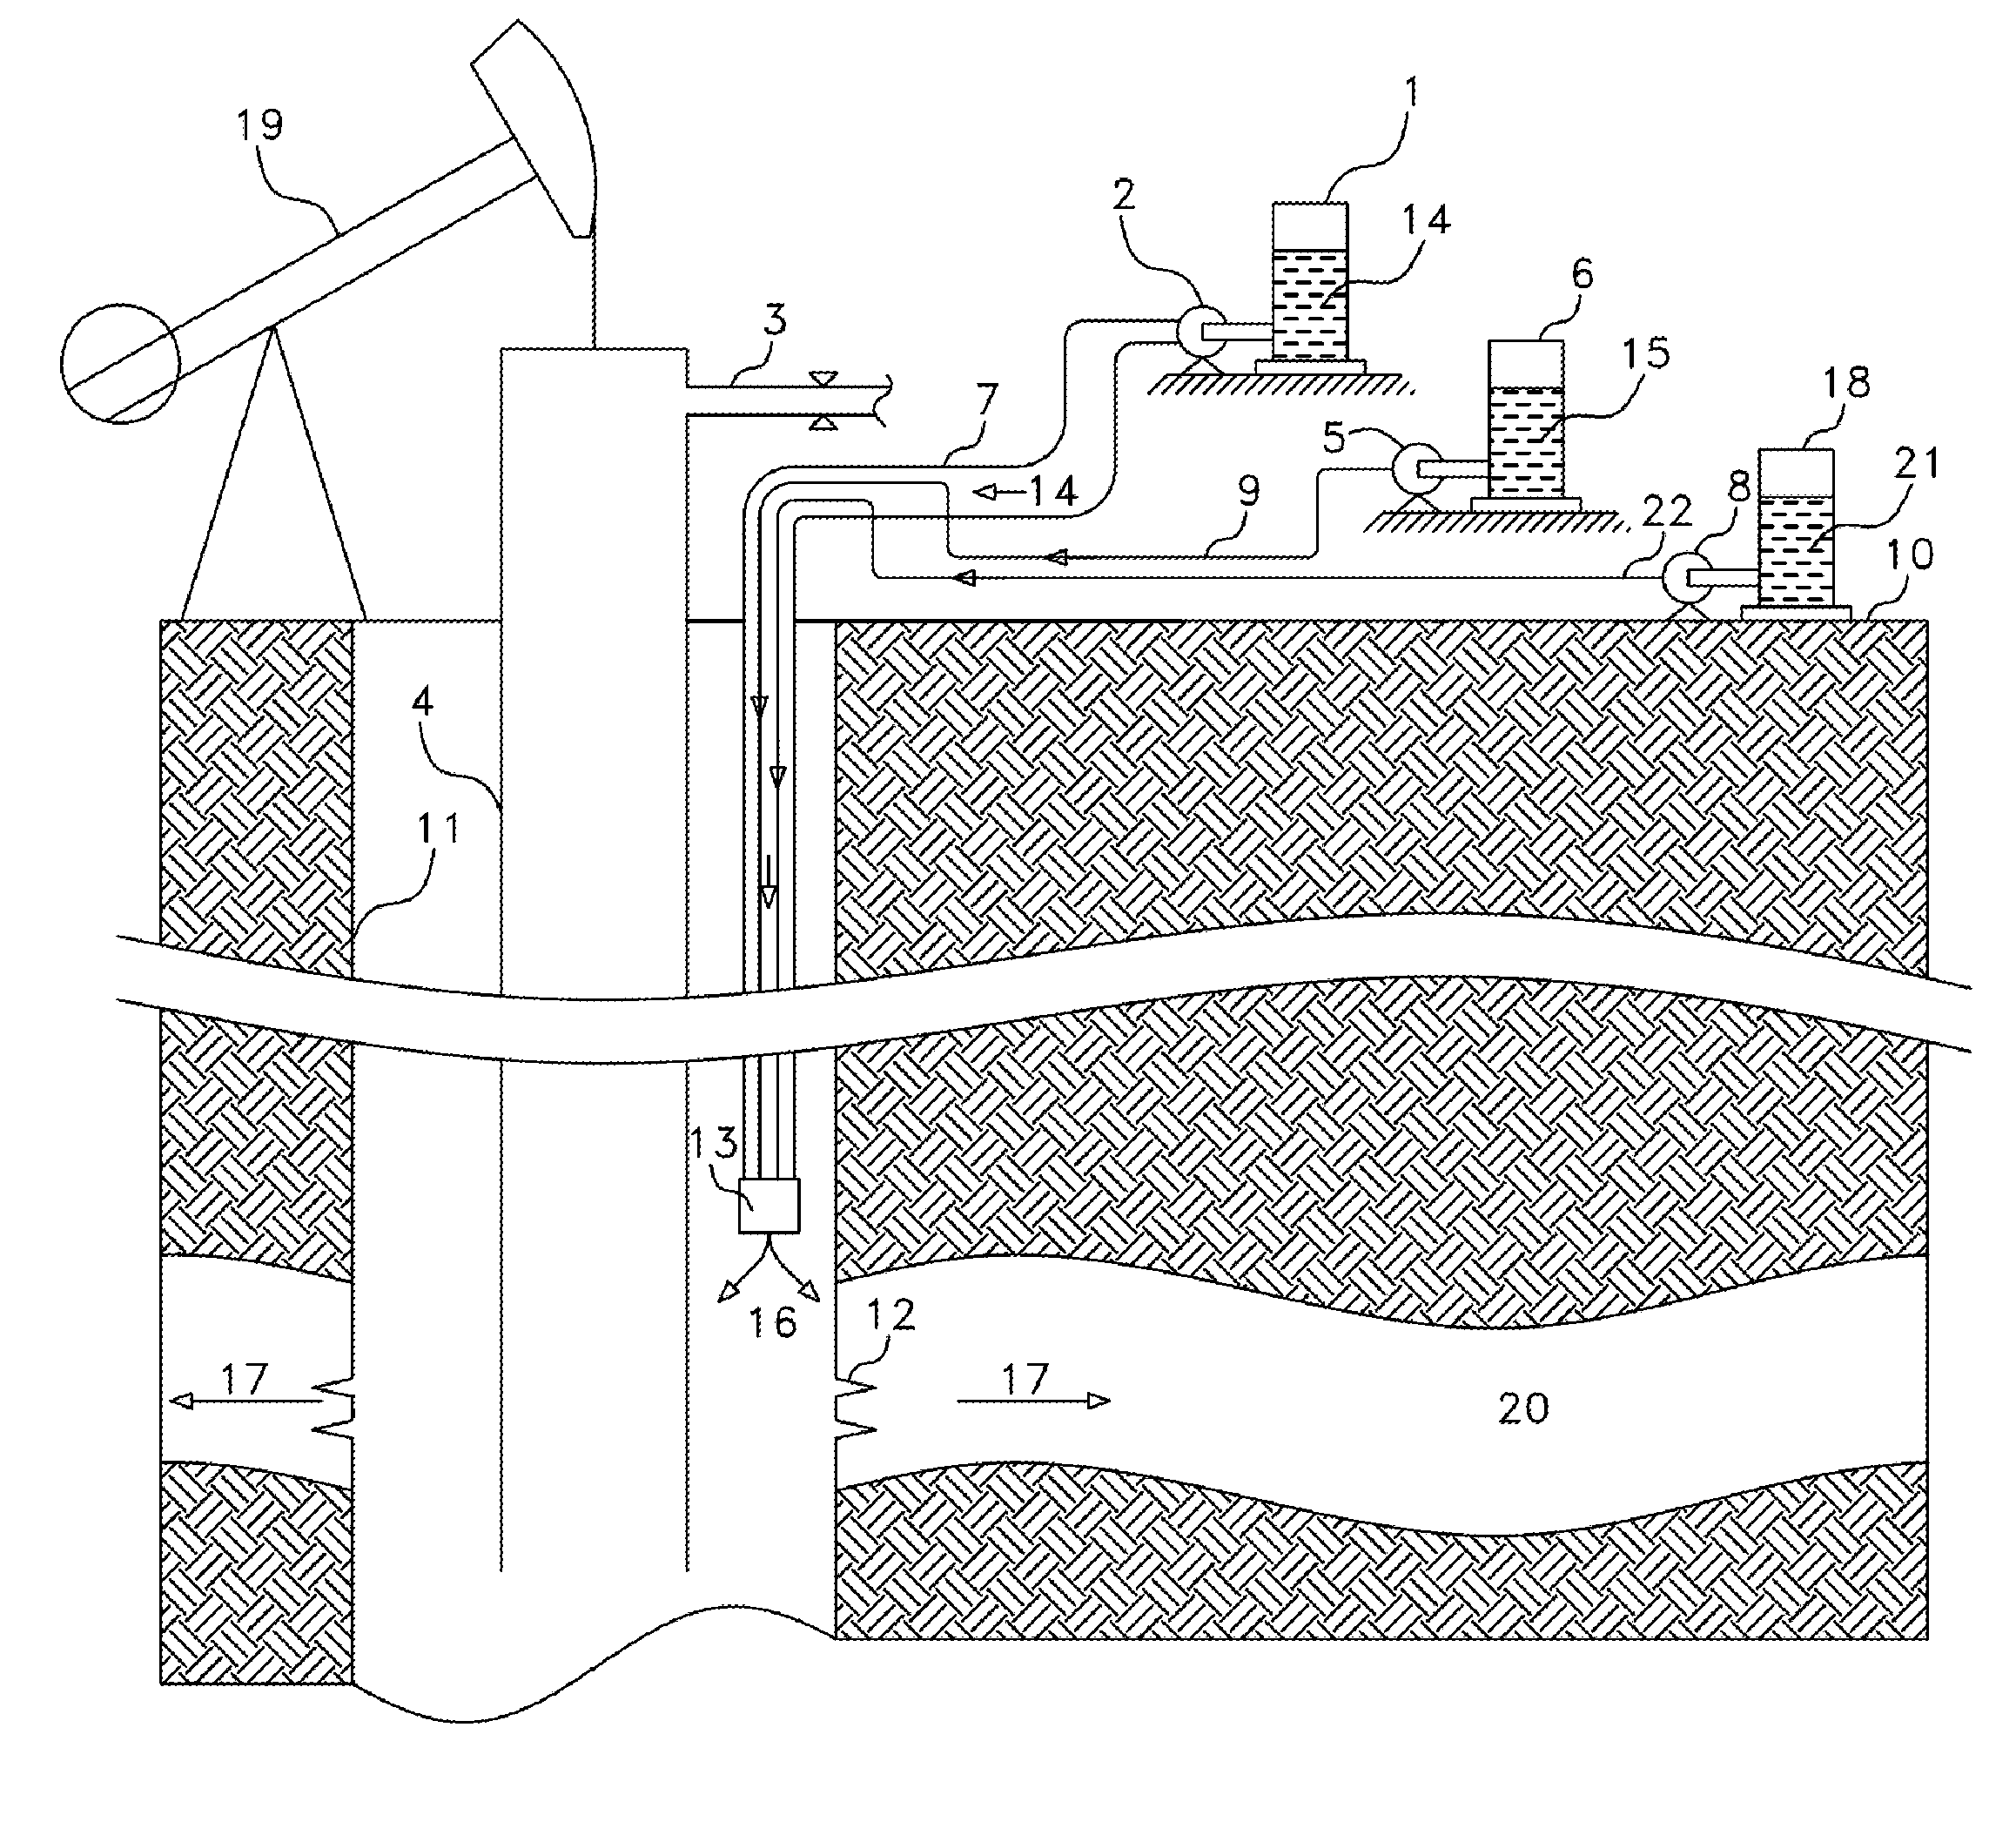 Method, Apparatus and Composition for Increased Recovery of Hydrocarbons by Paraffin and Asphaltene Control from Reaction of Fuels and Selective Oxidizers in the Subterranean Environment